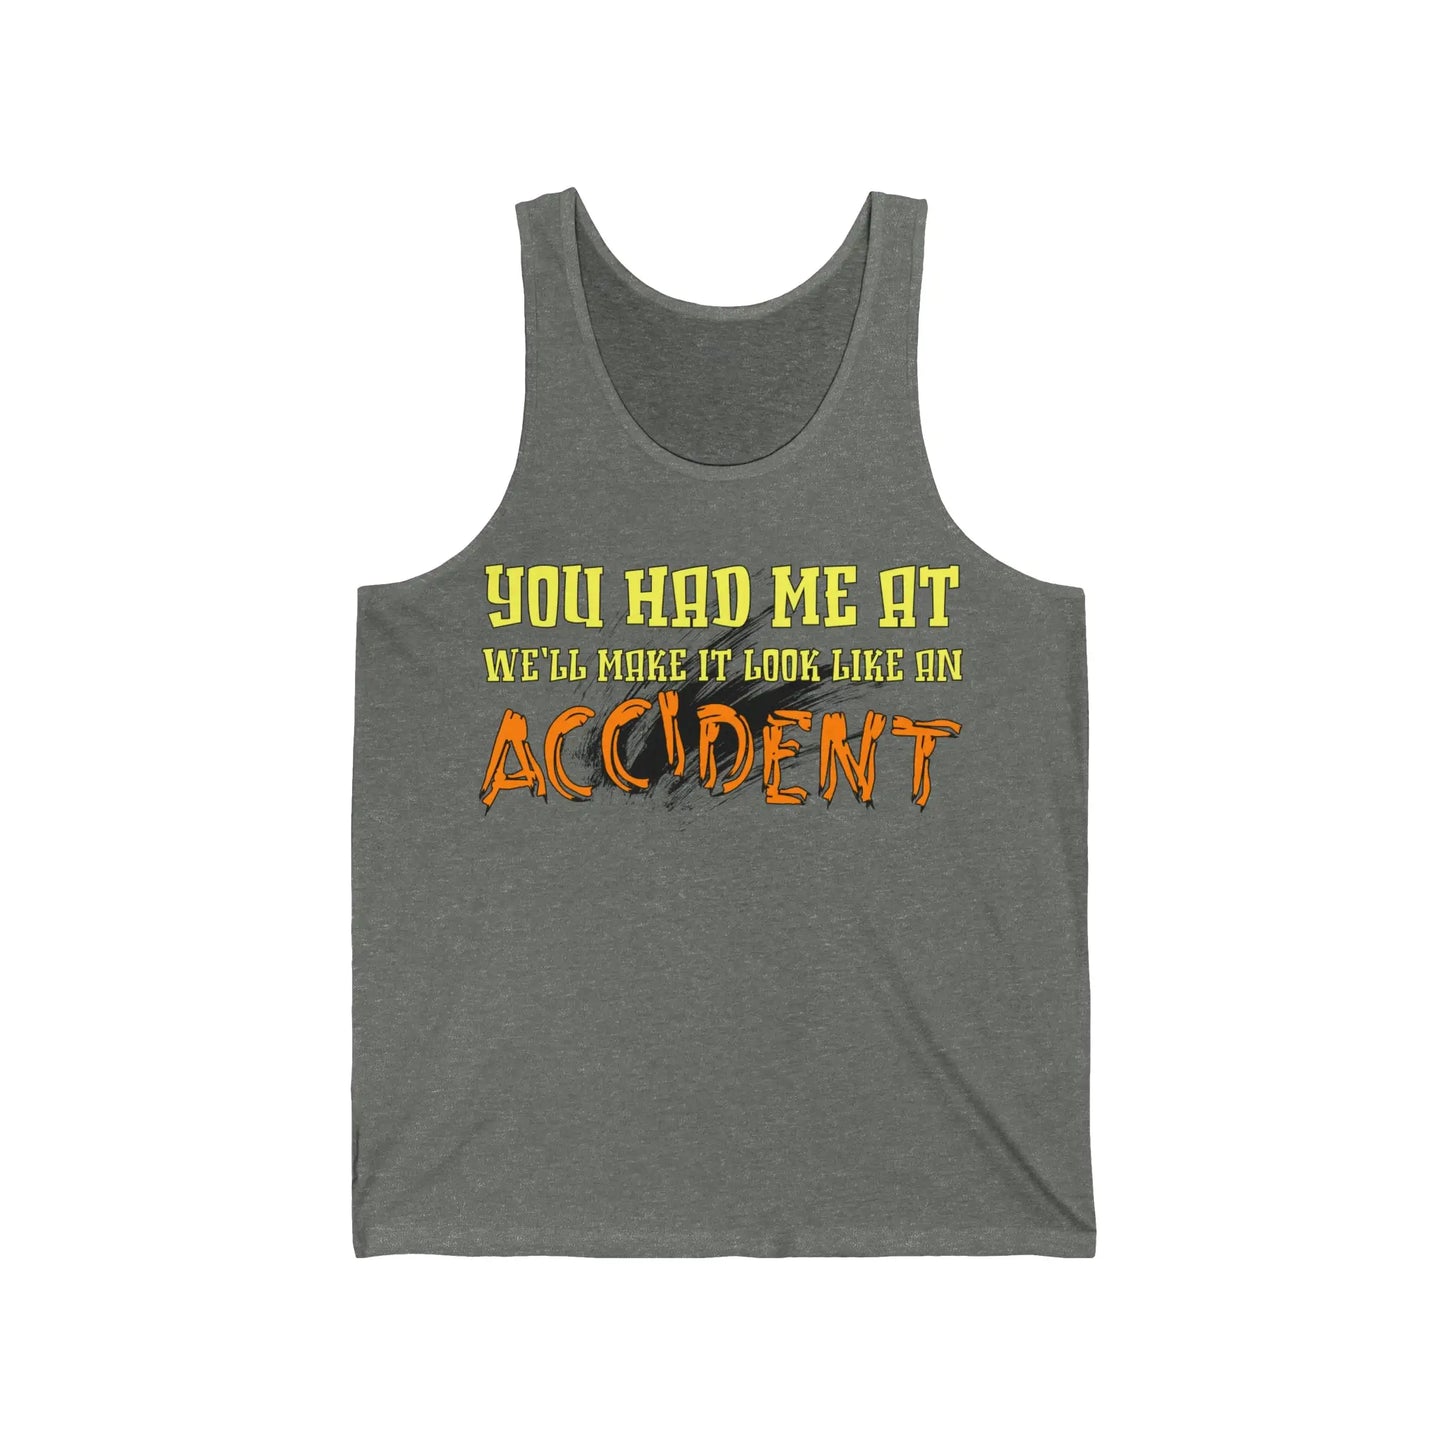 Make It Look Like An Accident Men's Jersey Tank - Wicked Tees